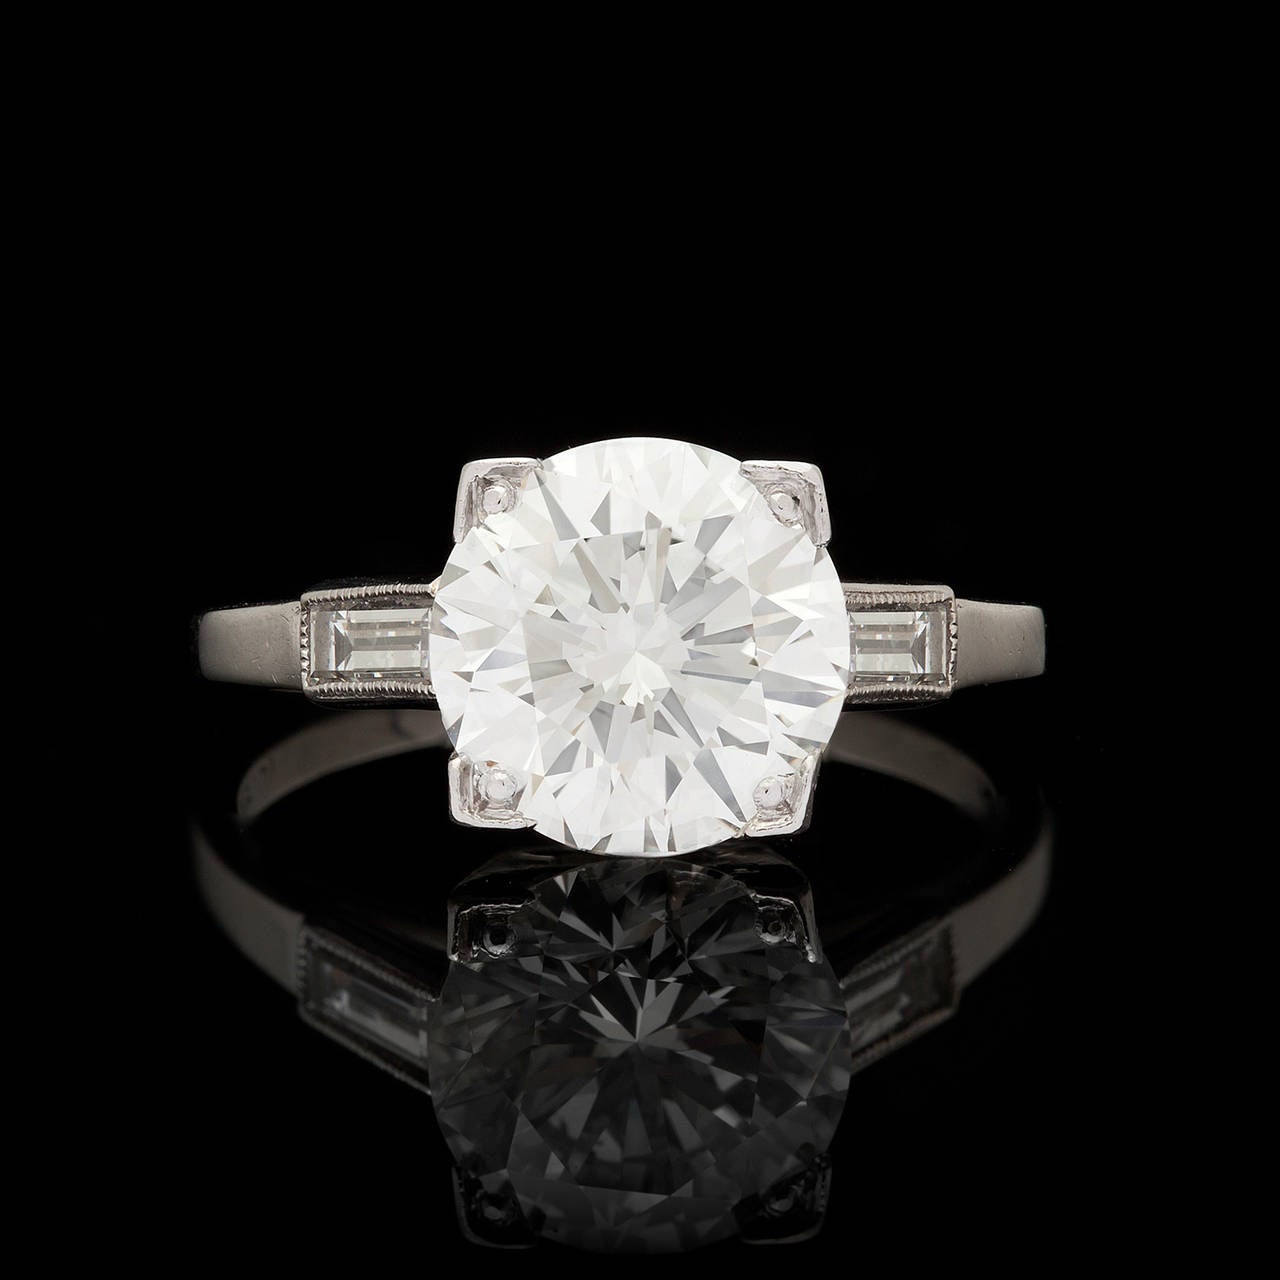 Vintage Platinum Setting, circa 1960s, Features a GIA 2.27 Carat J Color and VS1 Clarity Round Brilliant Cut Diamond Enhanced by Two Elegant Baguette Diamonds. The ring is a size 4.75, with room for adjustment, and weighs a total of 3.5 grams.